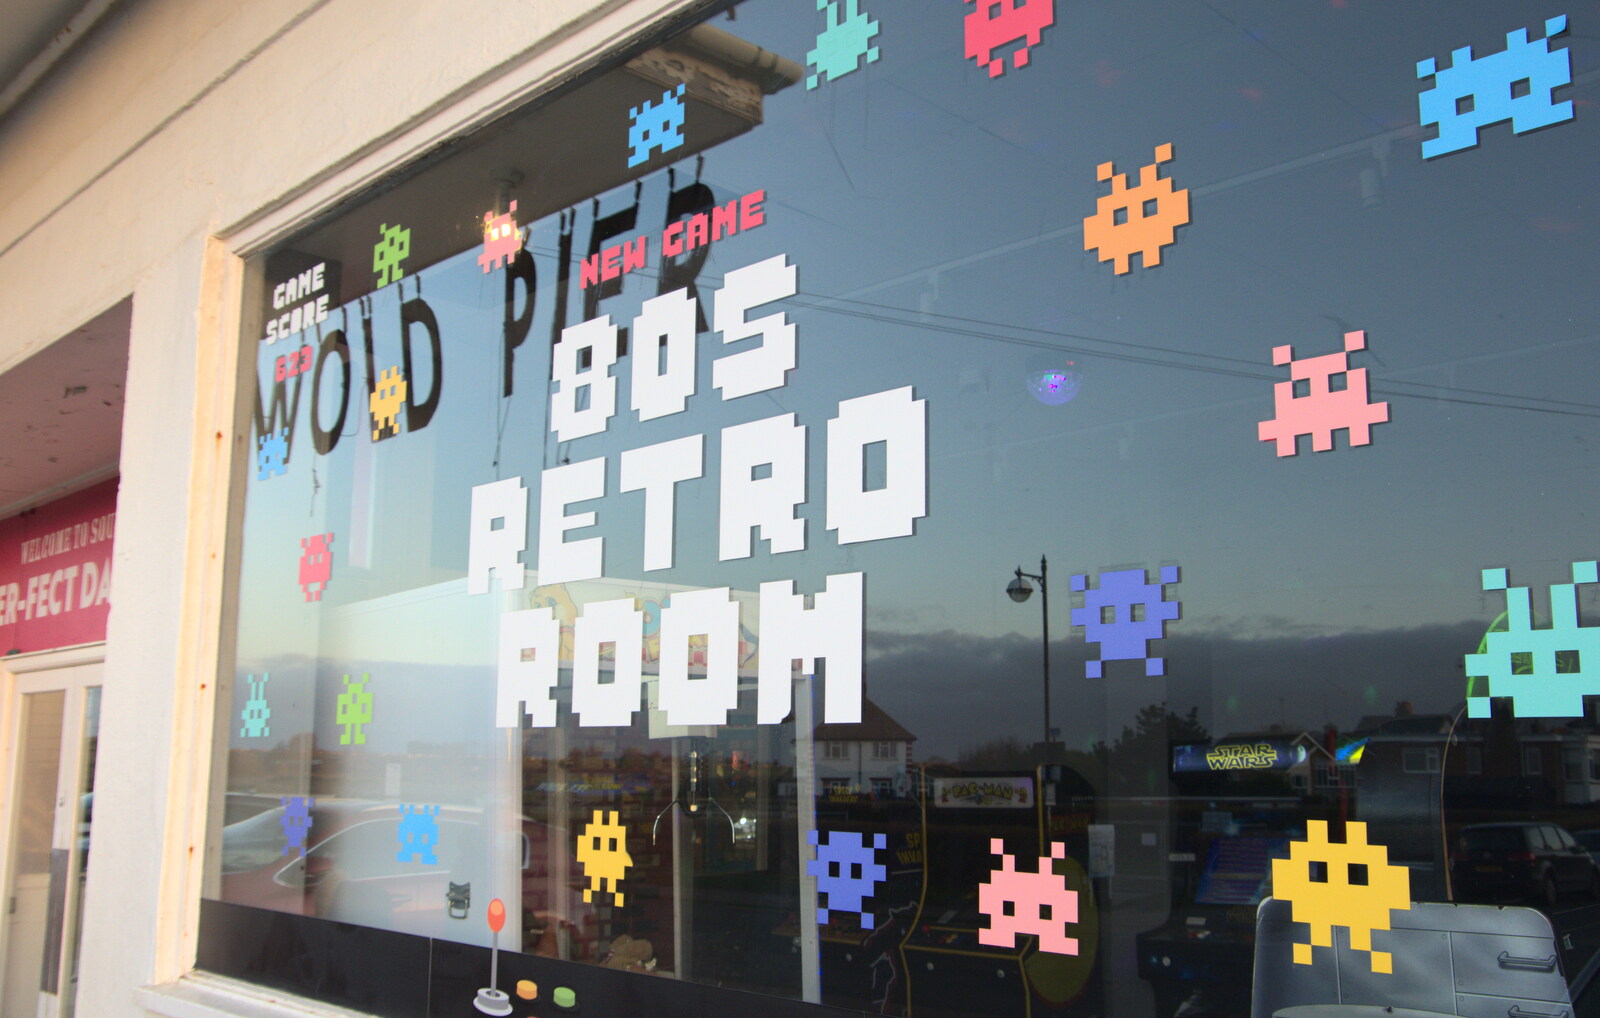 The 80s Retro Room from A Return to the Beach, Southwold, Suffolk - 20th December 2020